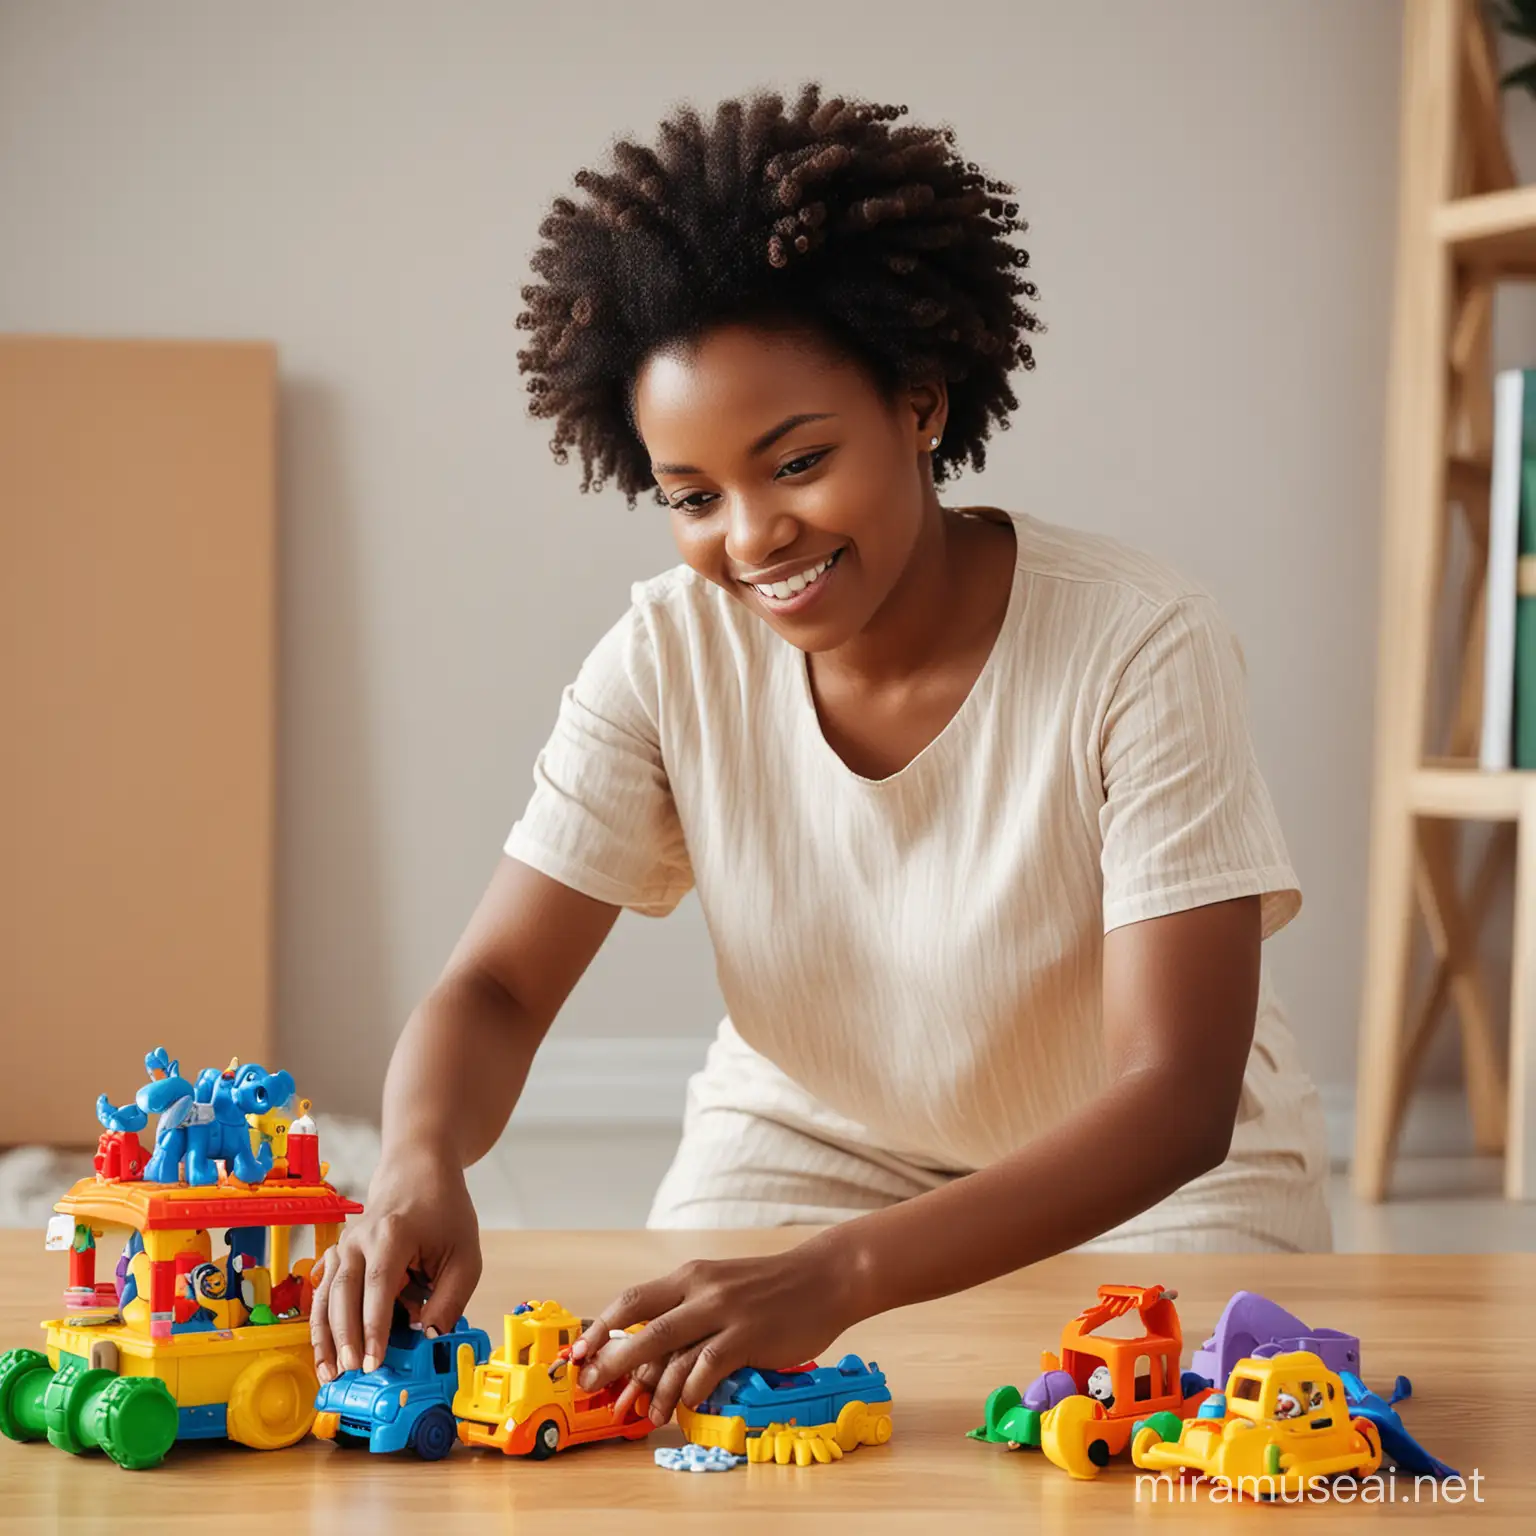 African Woman Engaging in Household Chores Cleaning Childrens Toys